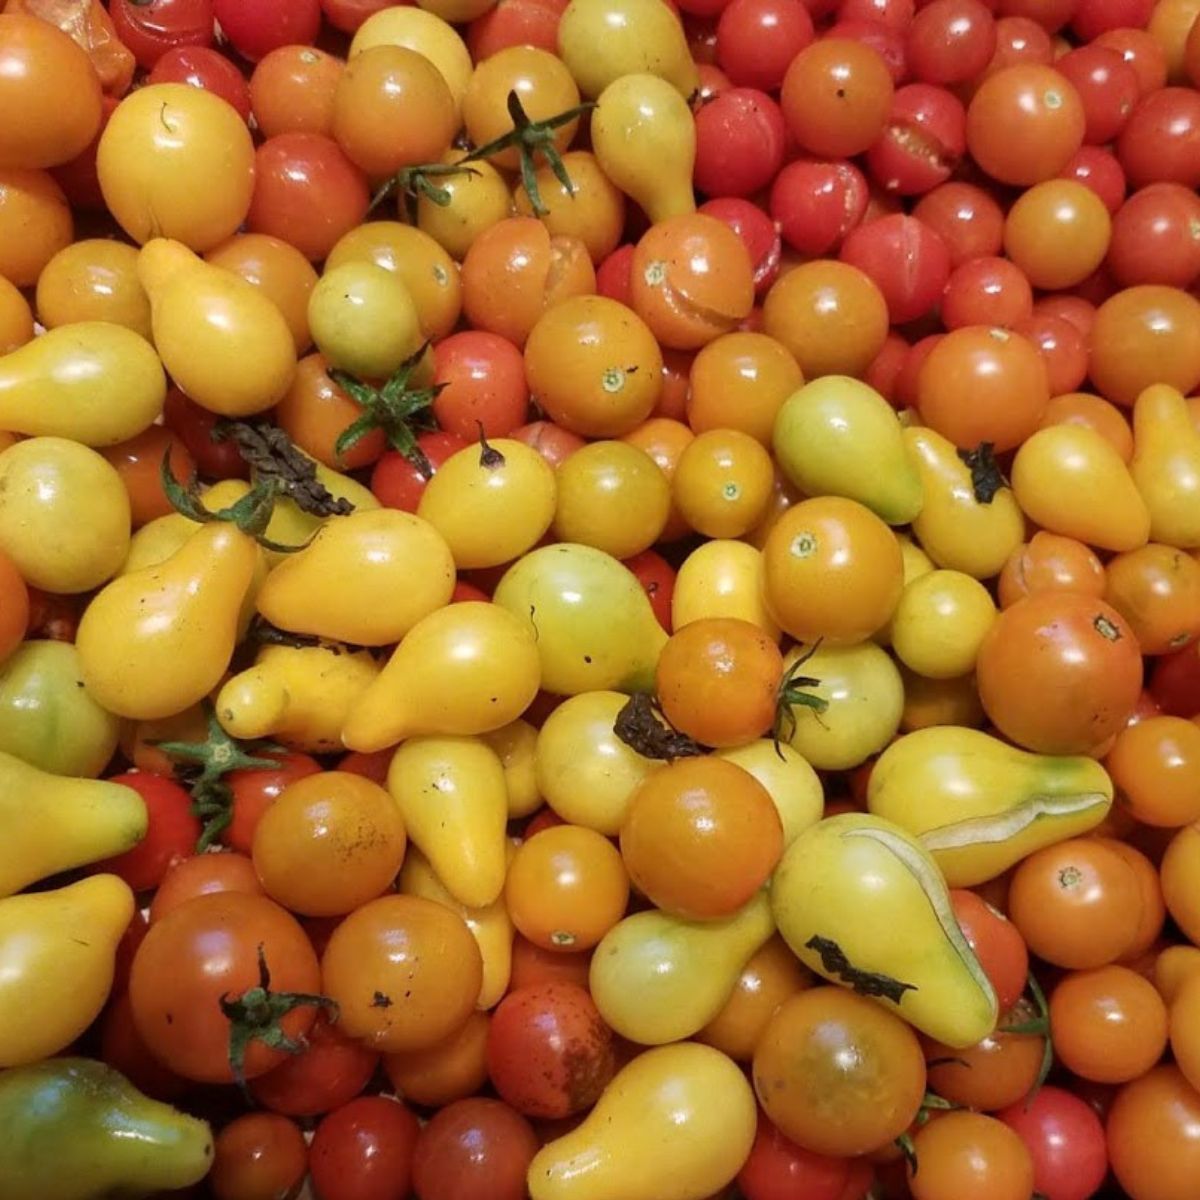 cherry and pear tomatoes in many differnts colors